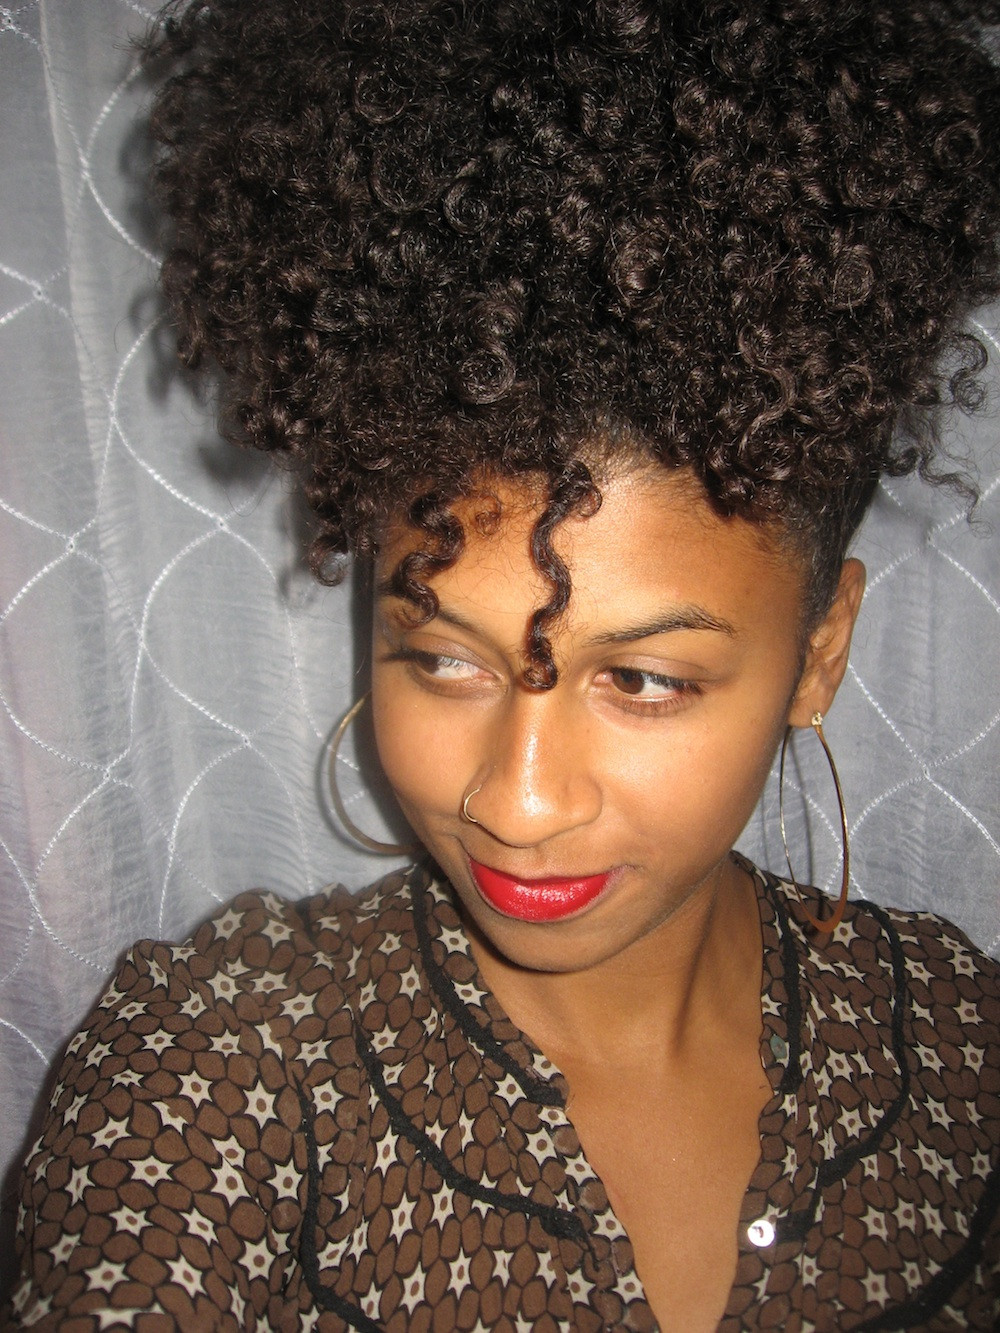 Pineapple Hairstyle Natural Hair
 Shanti & Antoinette Natural Hair Style Icons